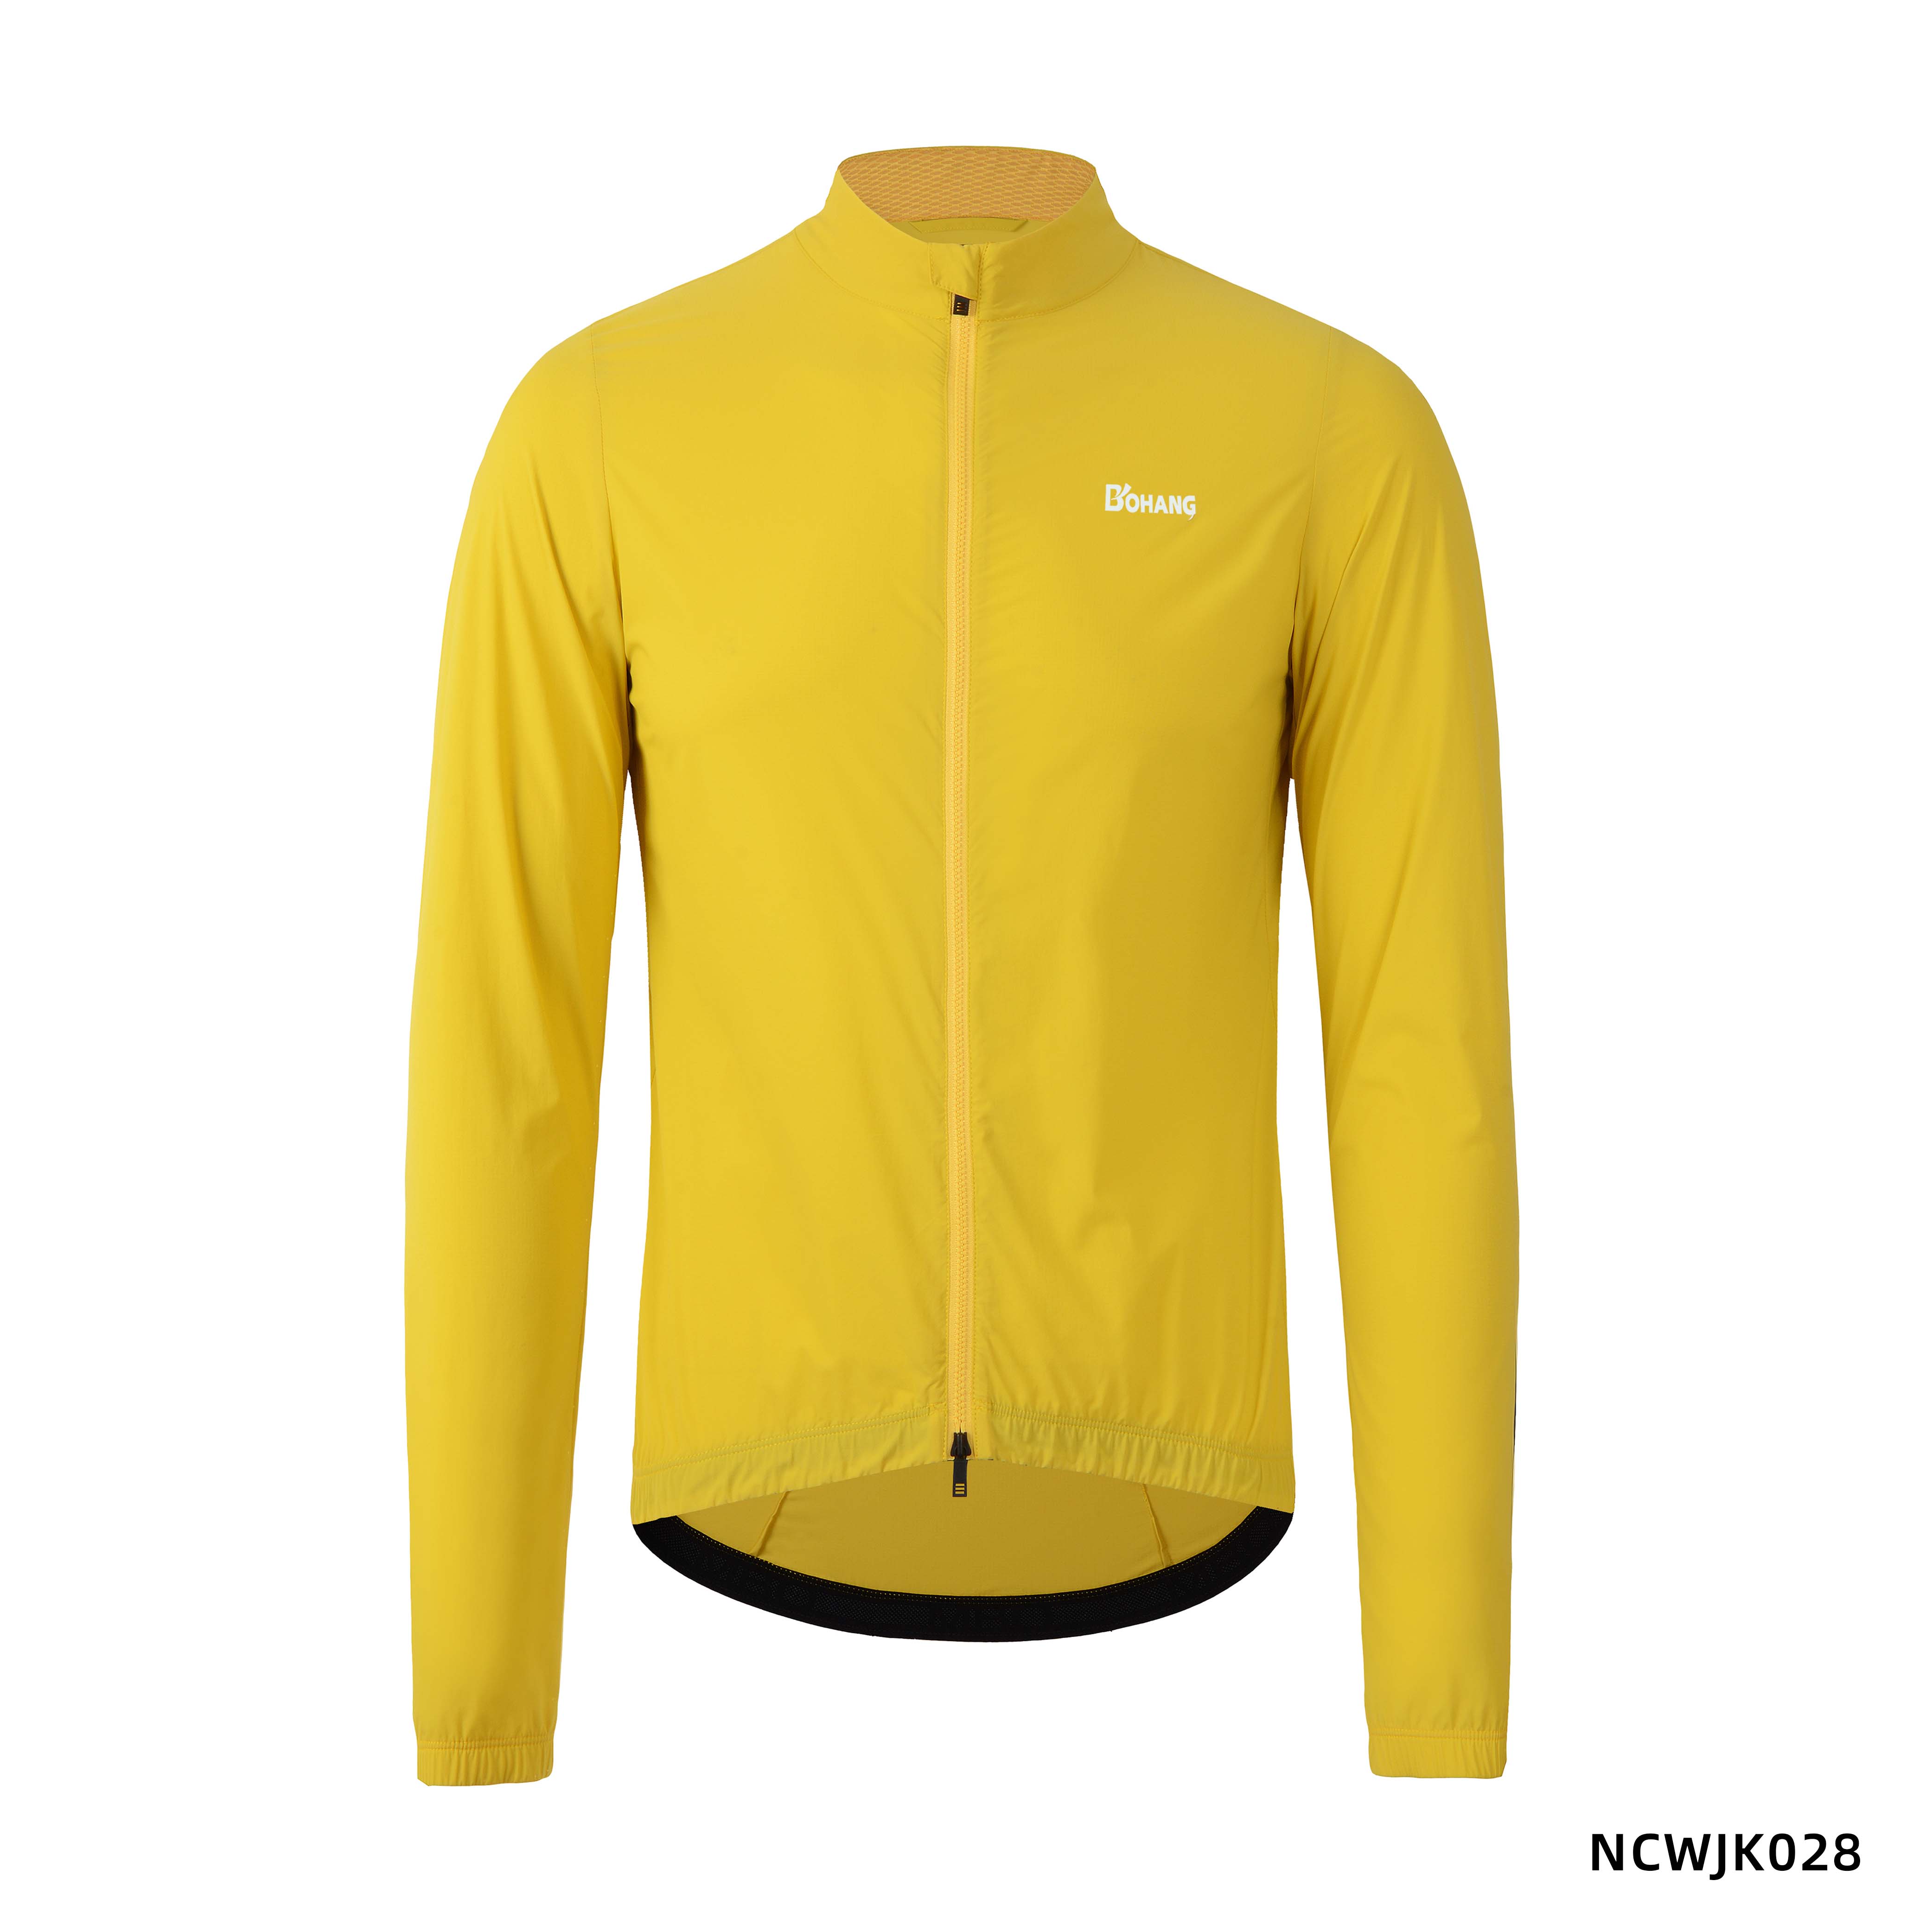 Why Is The NCWJK028 Lightweight Cycling Windbreaker a Must-have For Cyclists?